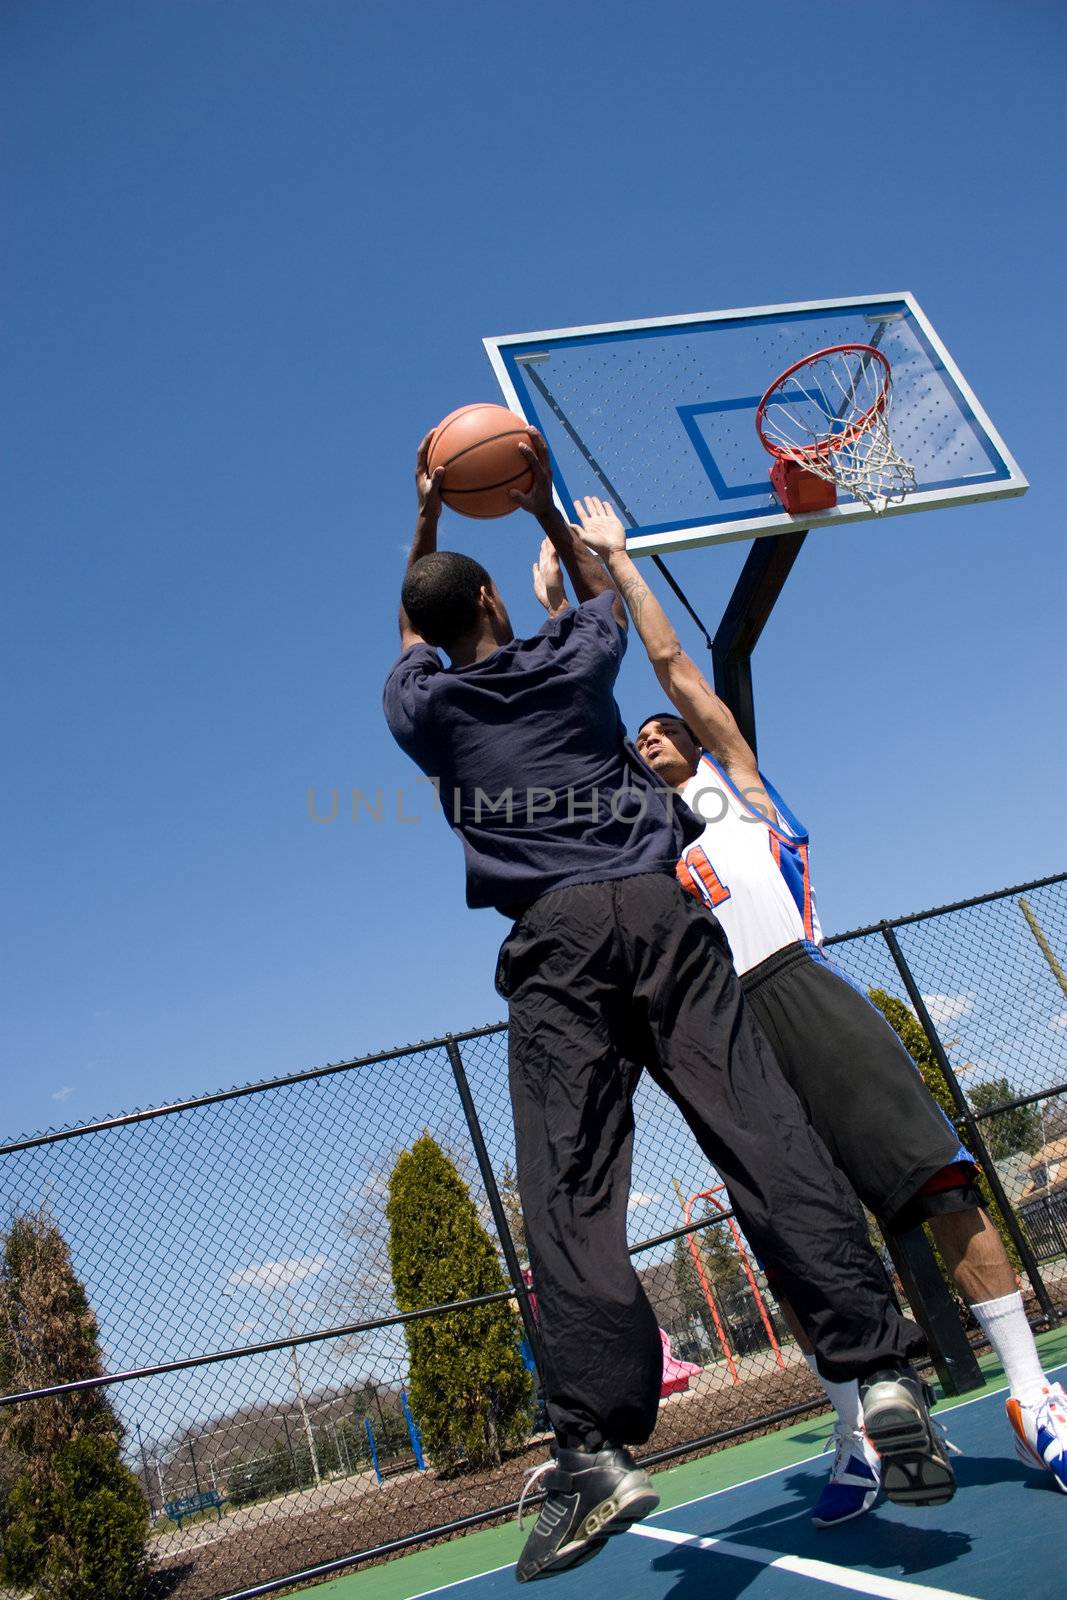 A young basketball player going for a jump shot.